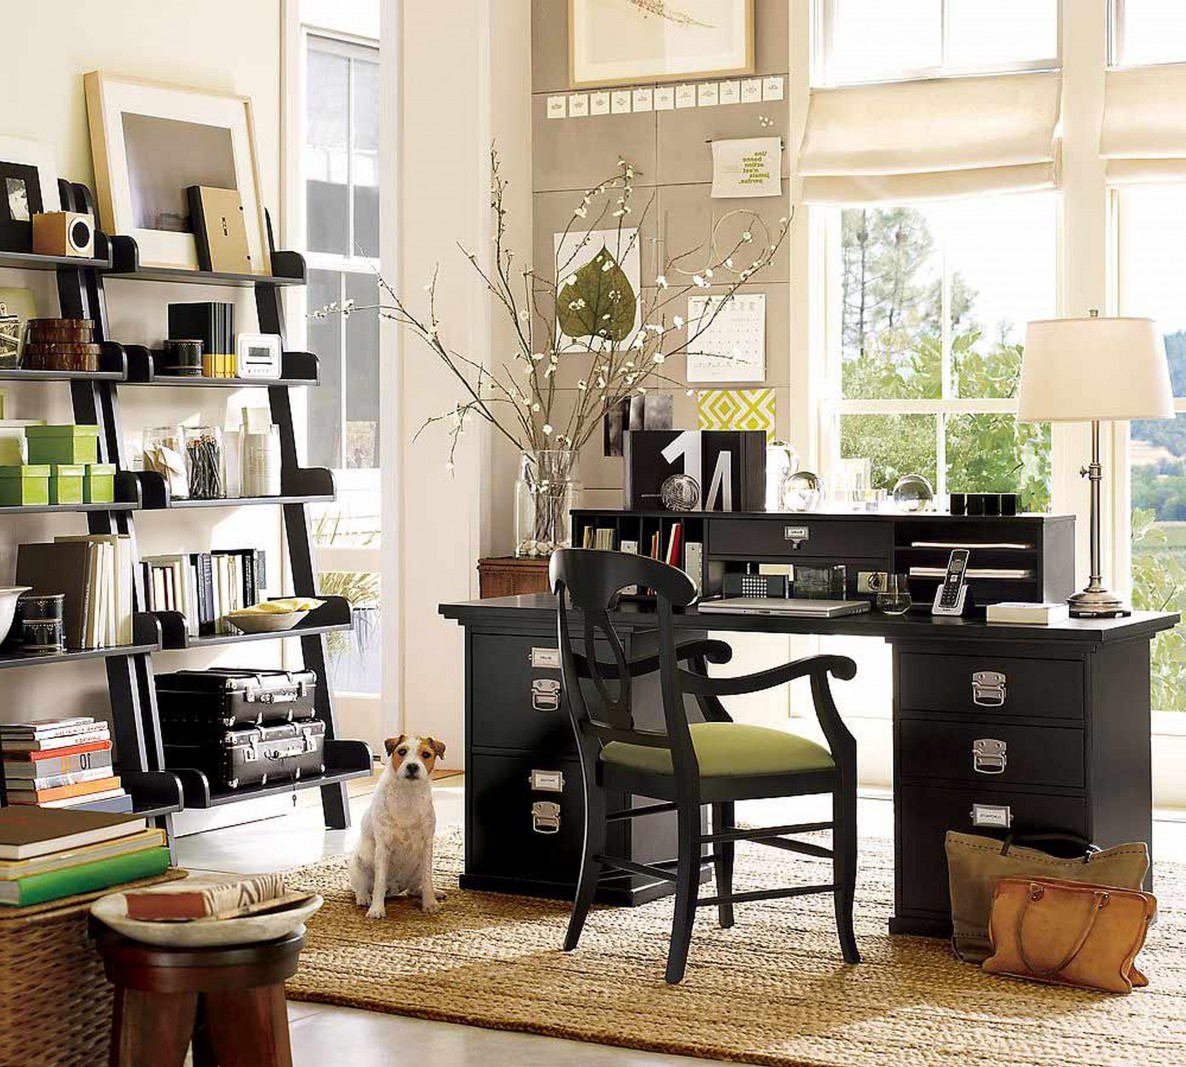 Outstanding Craftsman Home Office Design